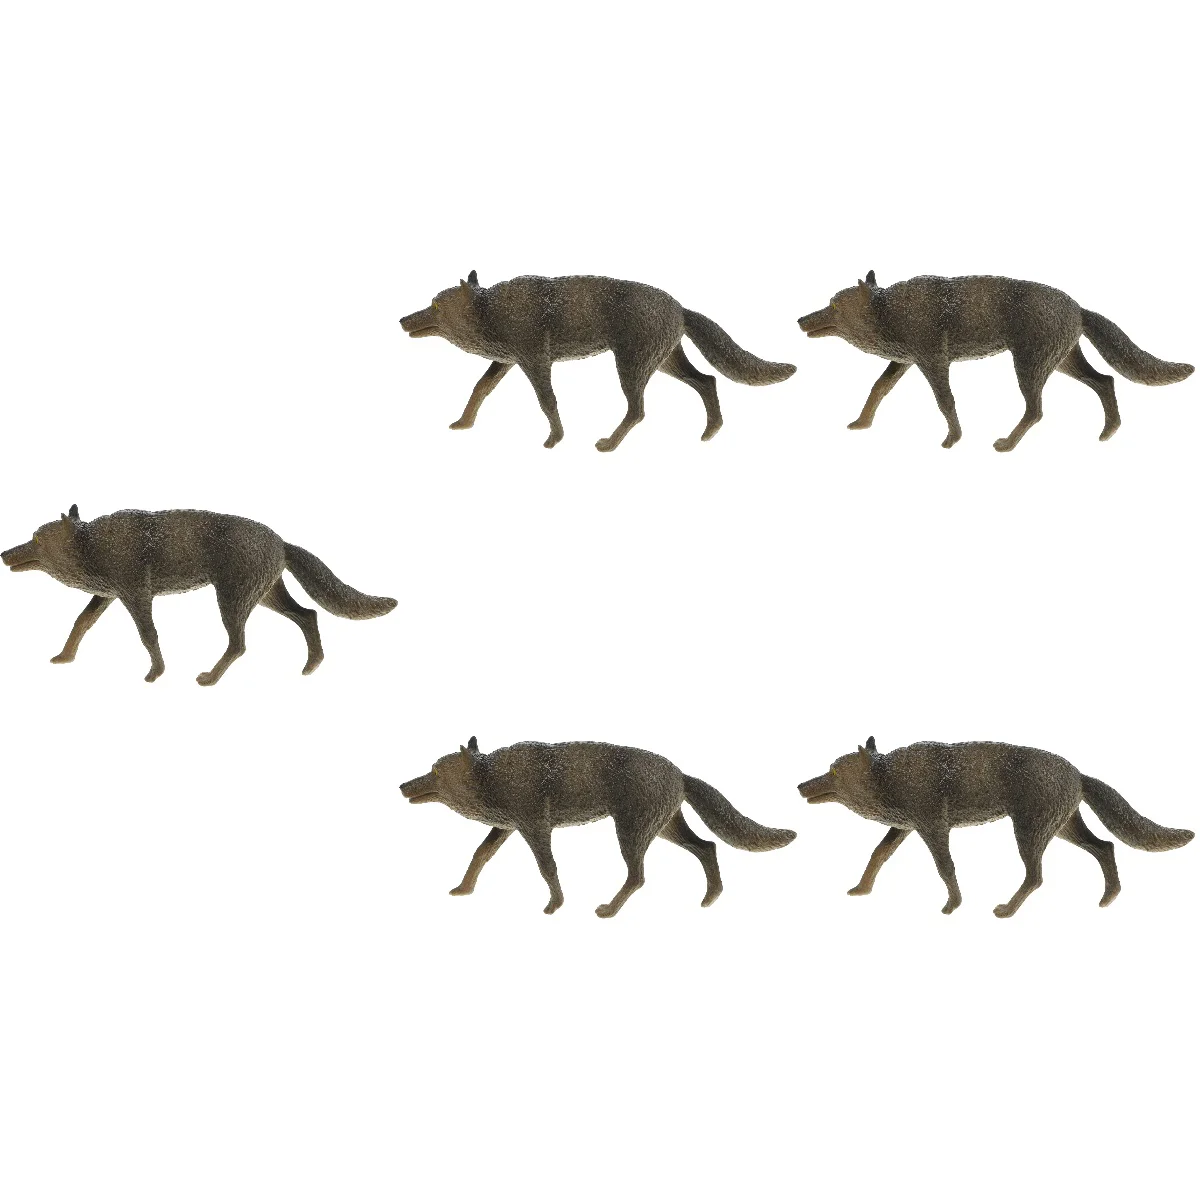 

Set 5 Wolf Model Toy Small Decoration Simulation Animal Figurines Plastic Playes Recognition Models Lifelike Figures